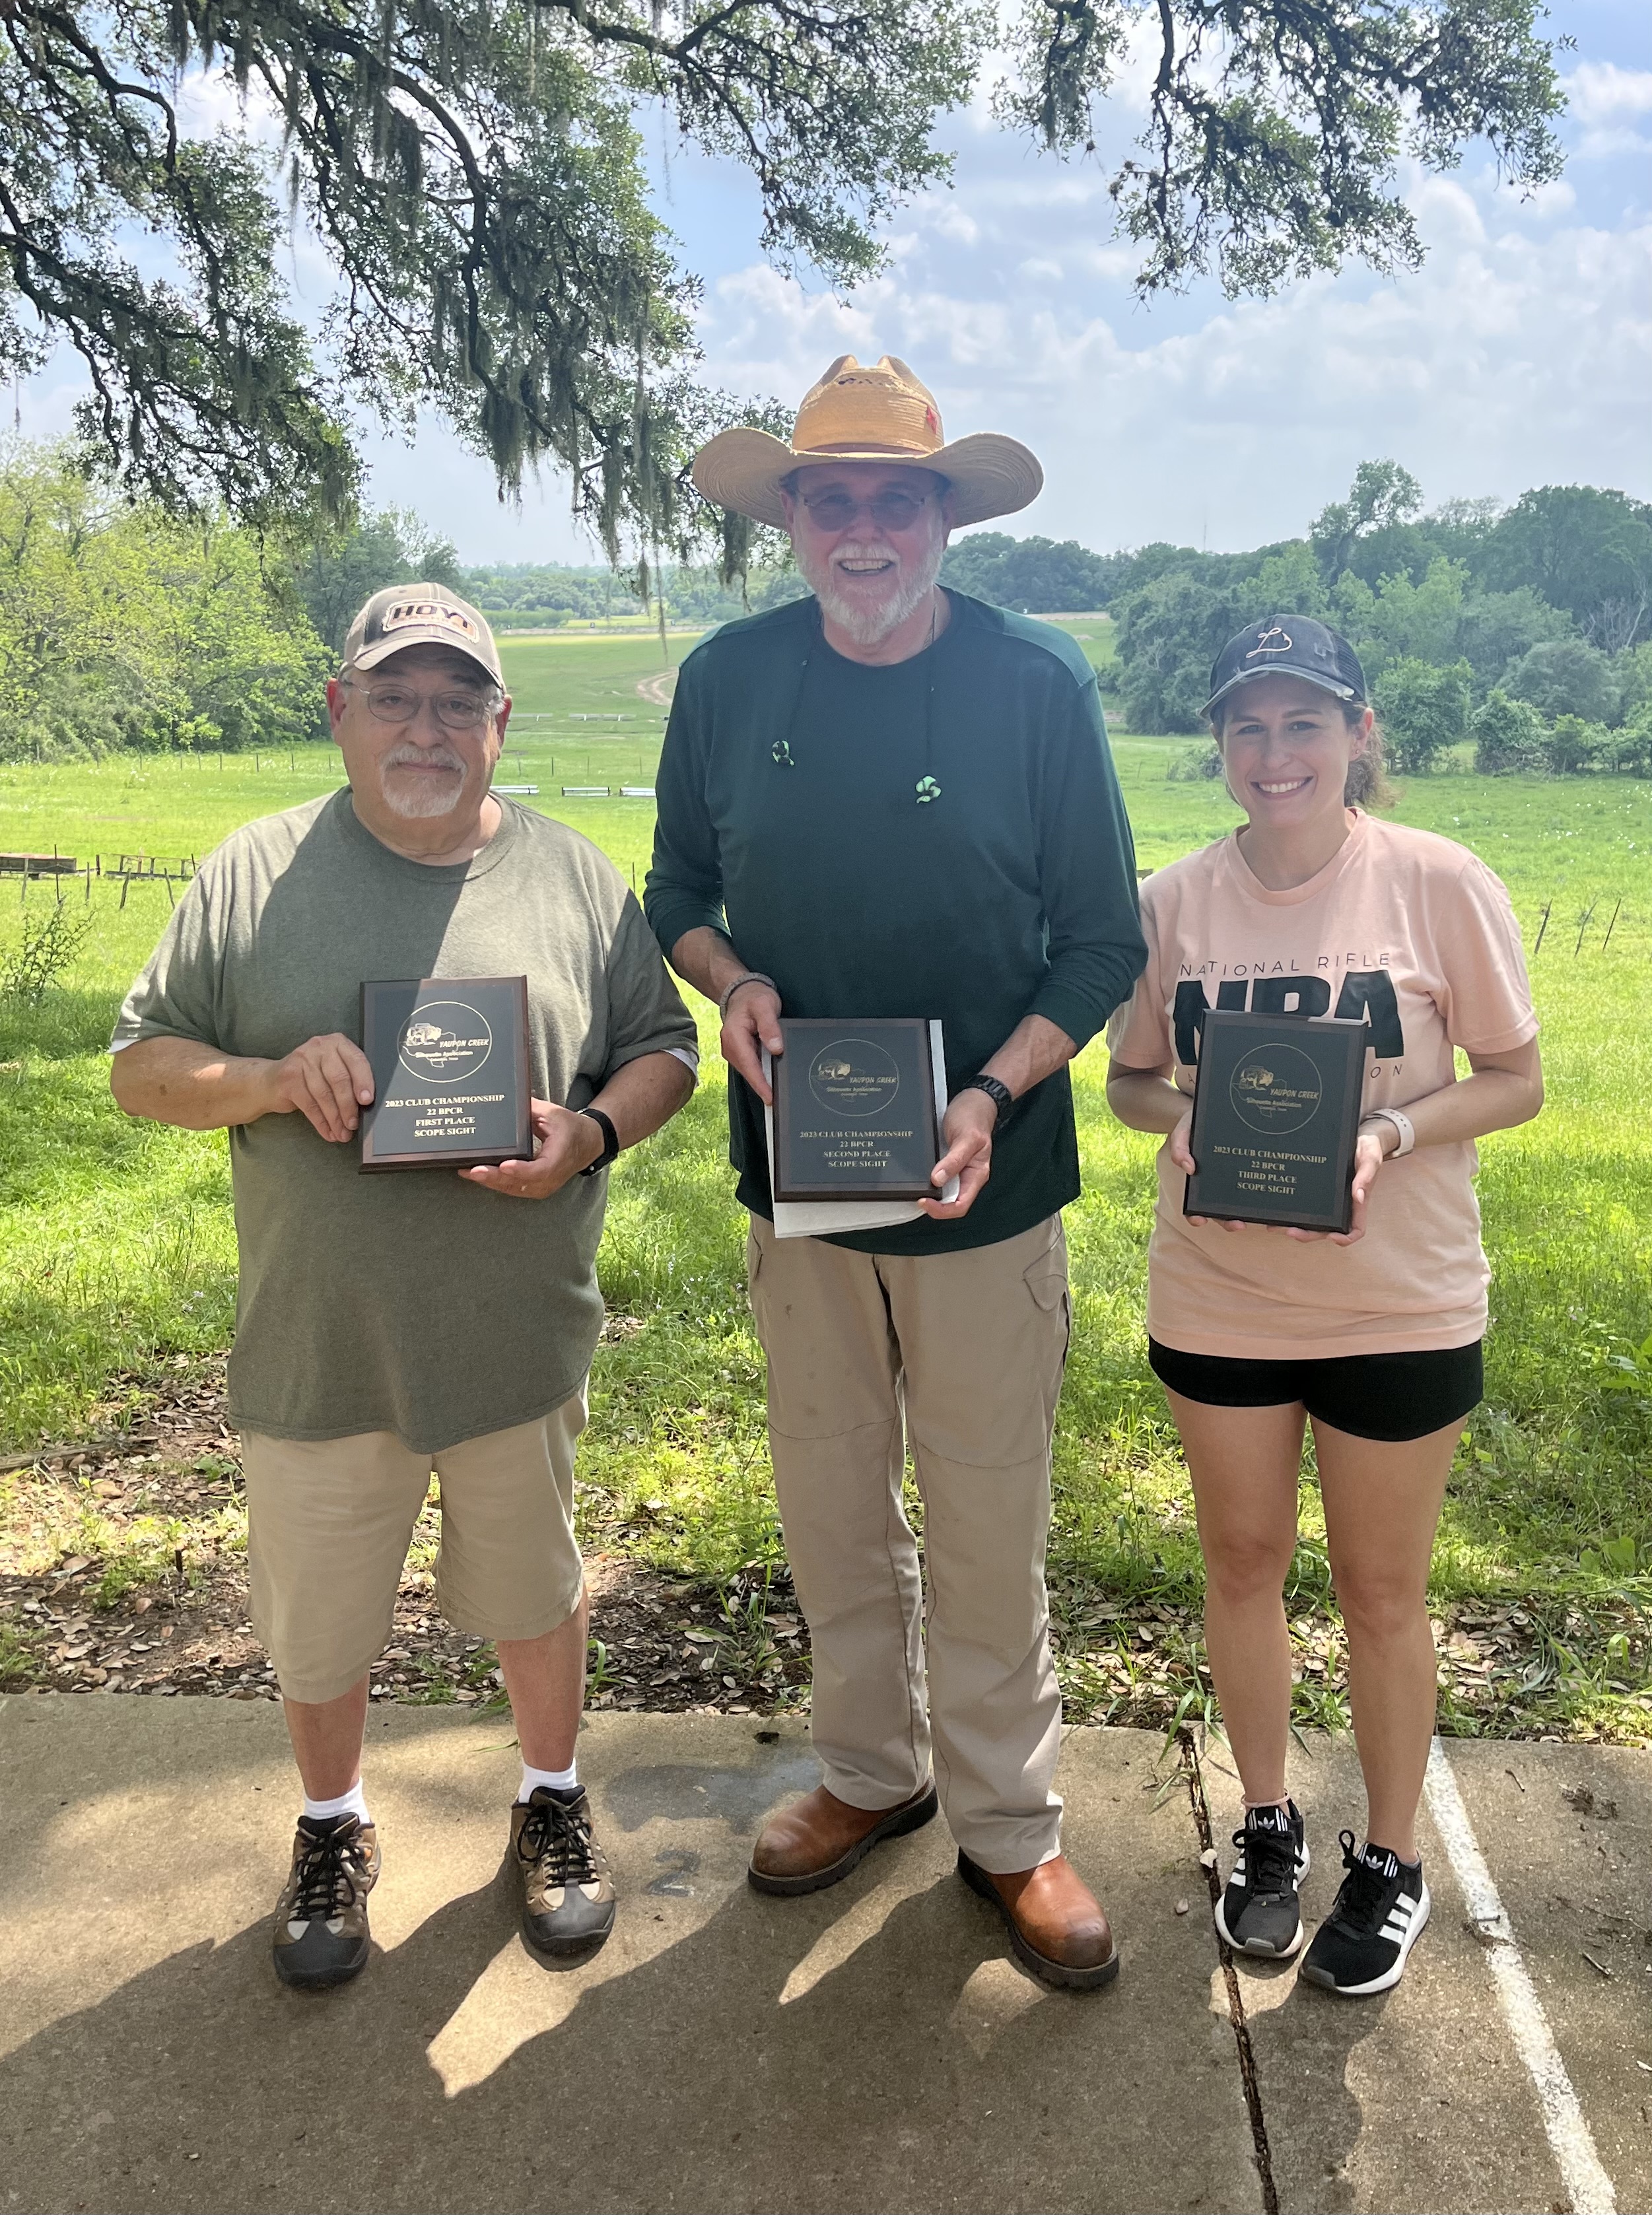 Bob Garibay and Russ Miller tied for 1st in the scope class with a 45. Bob took the 1st scope award after a shoot off with Russ. Russ took 2nd place award with Shelby Ross taking the 3rd place award with a 44. Congratulations to our Scope Class winners.